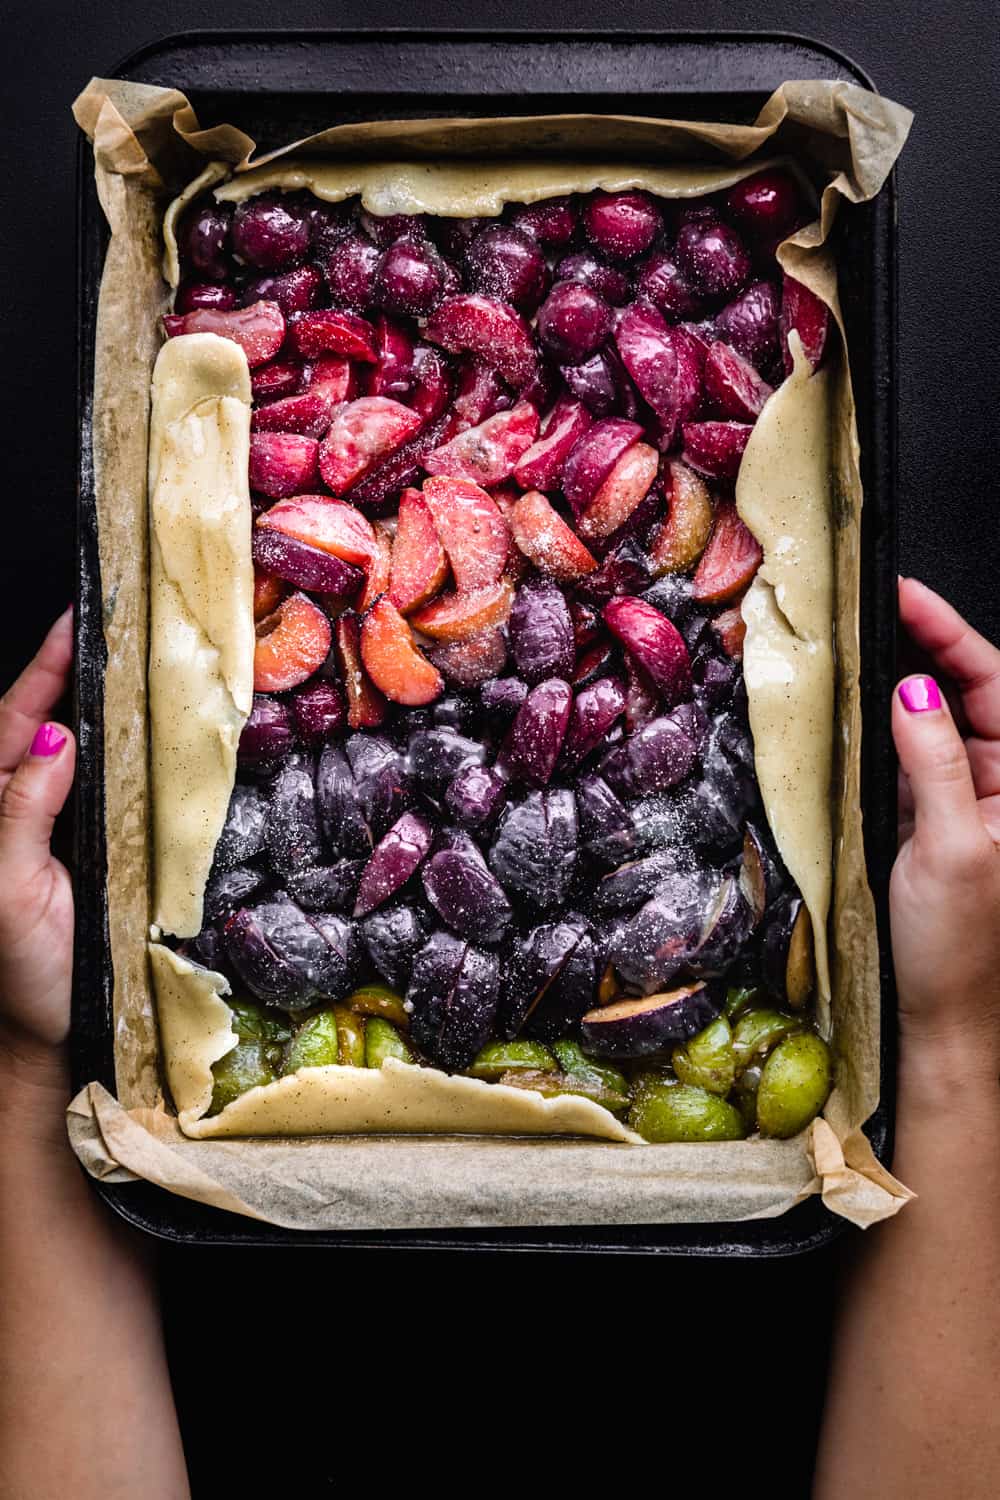 Daniela Gerson holding a very colorful cherry and plum galette; overhead on a dark background.